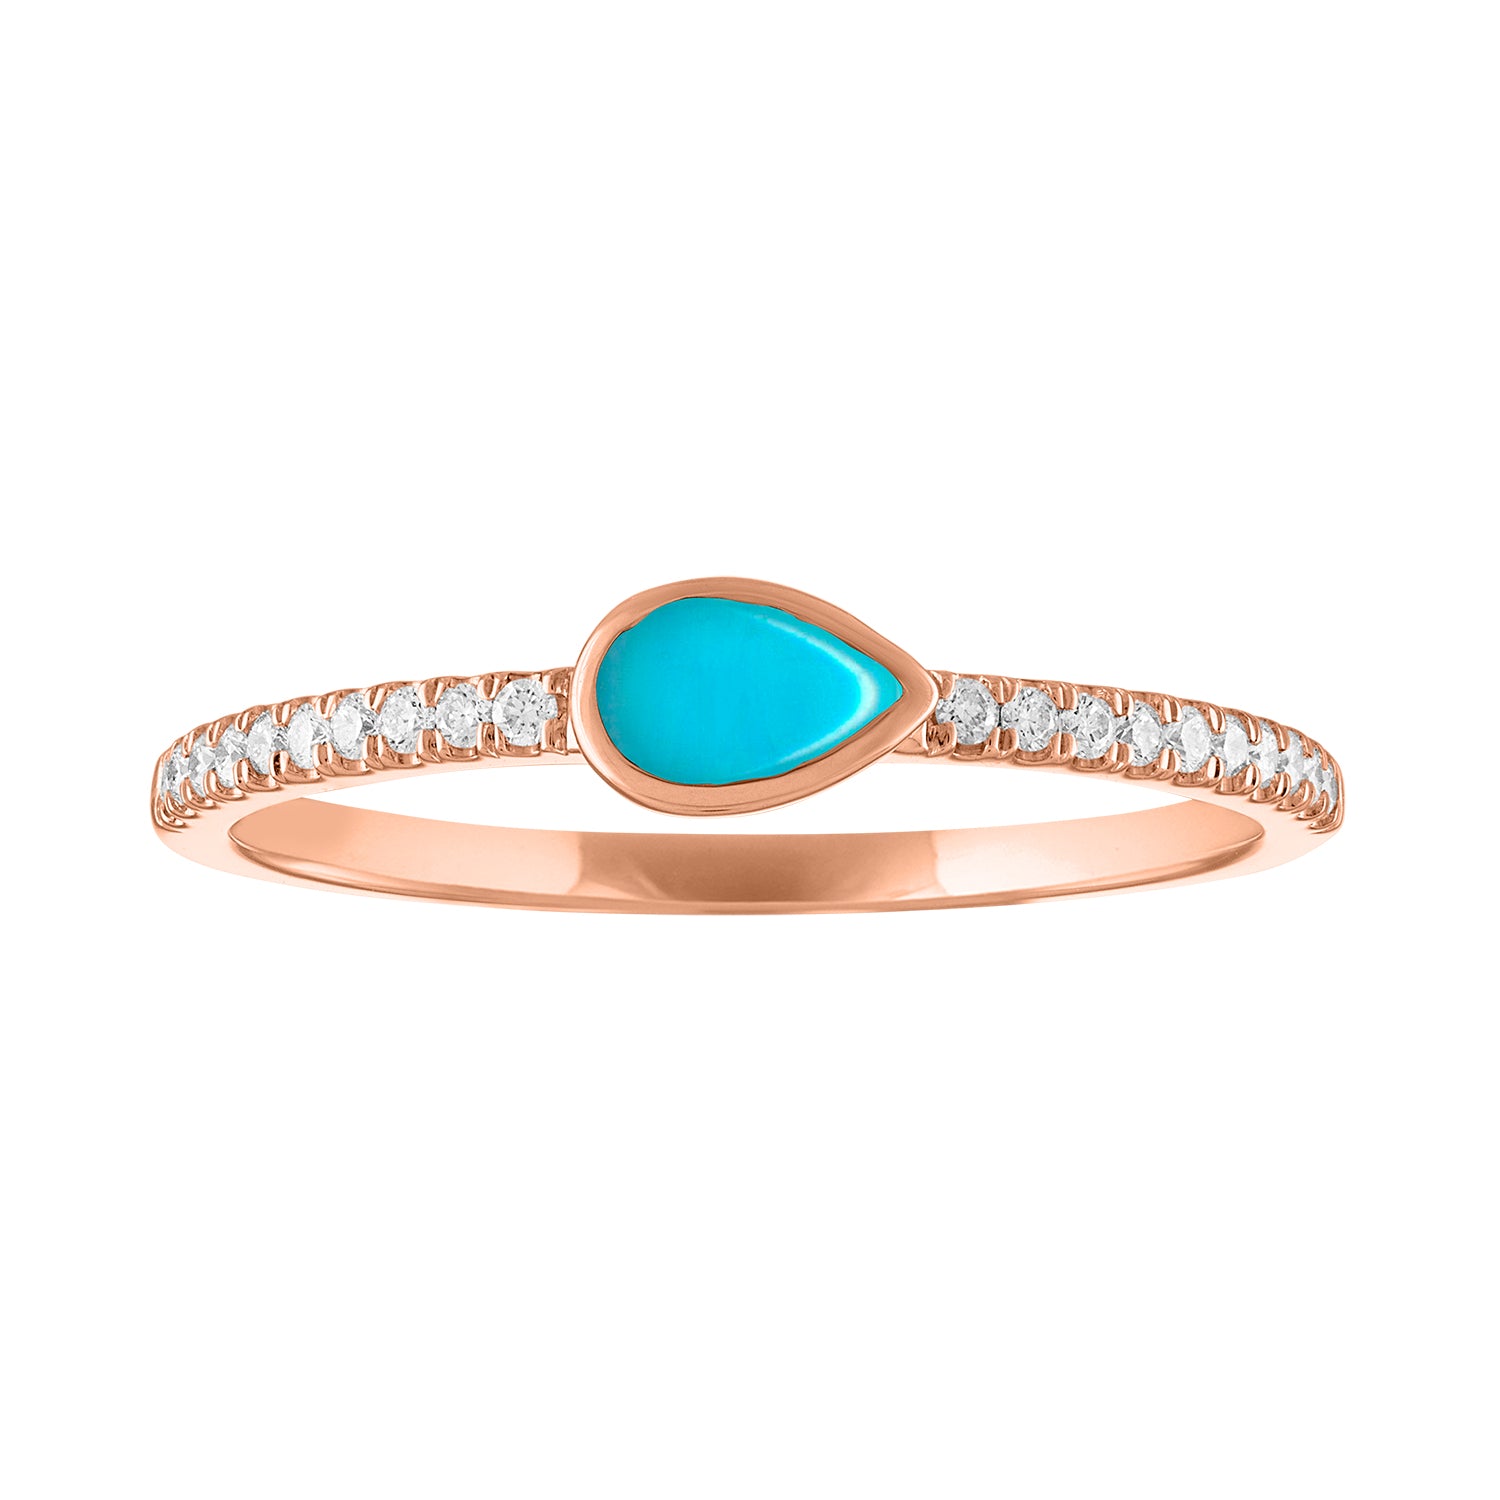 Rose gold skinny band with a bezeled pear shape turquoise in the center and round diamond on the shank. 